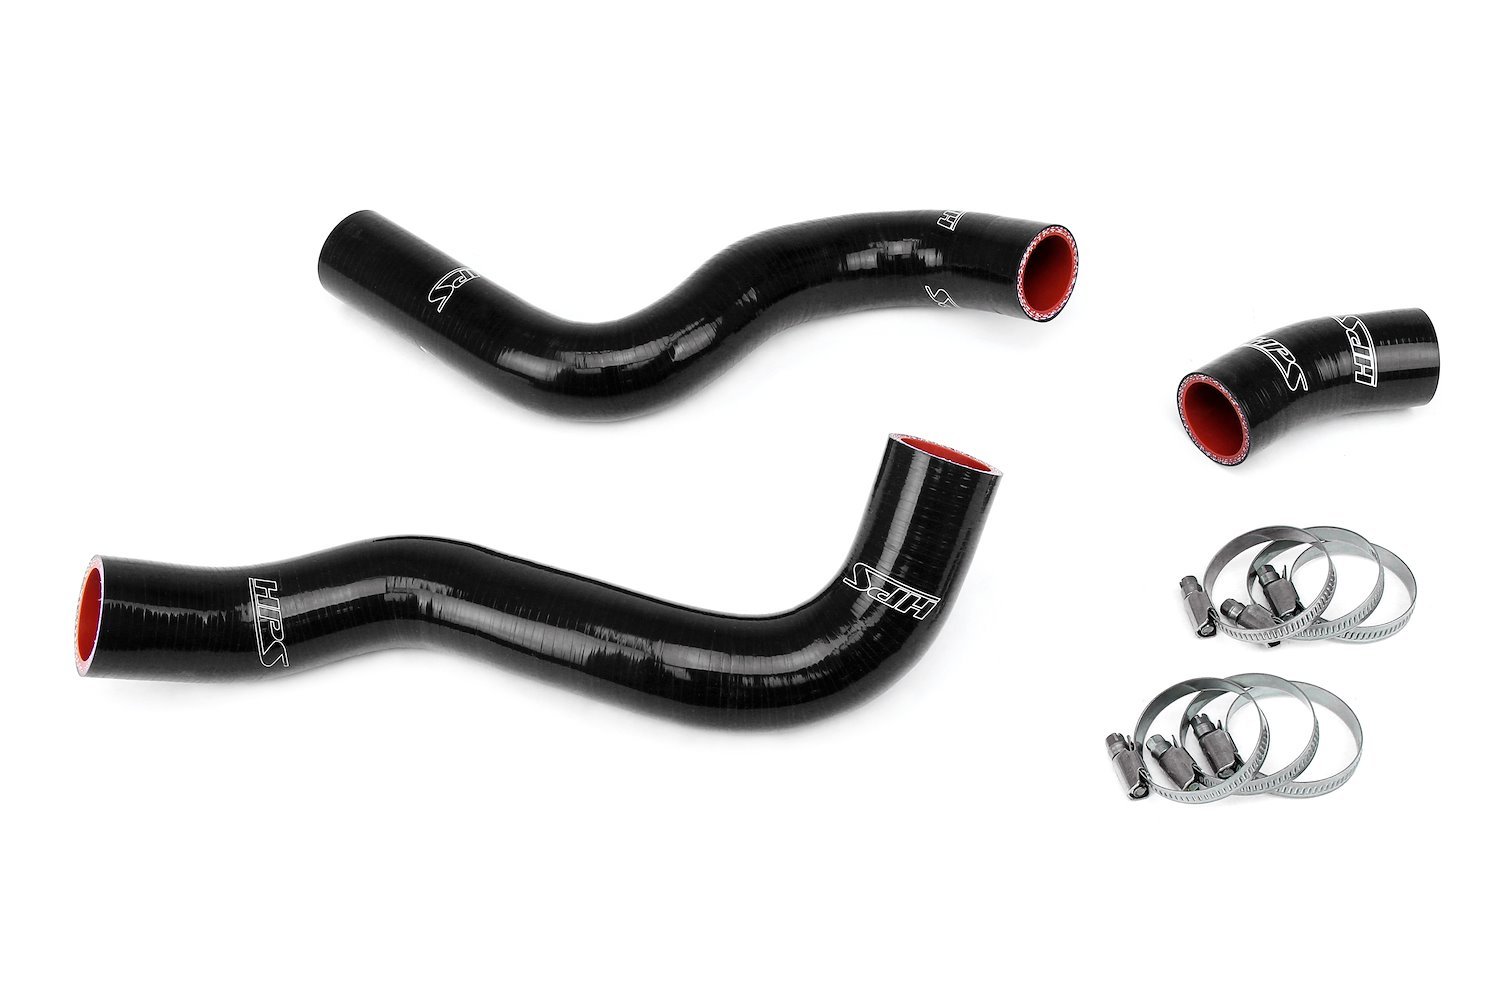 57-2055-BLK Radiator Hose Kit, 3-Ply Reinforced Silicone, Replaces Rubber Radiator Coolant Hoses